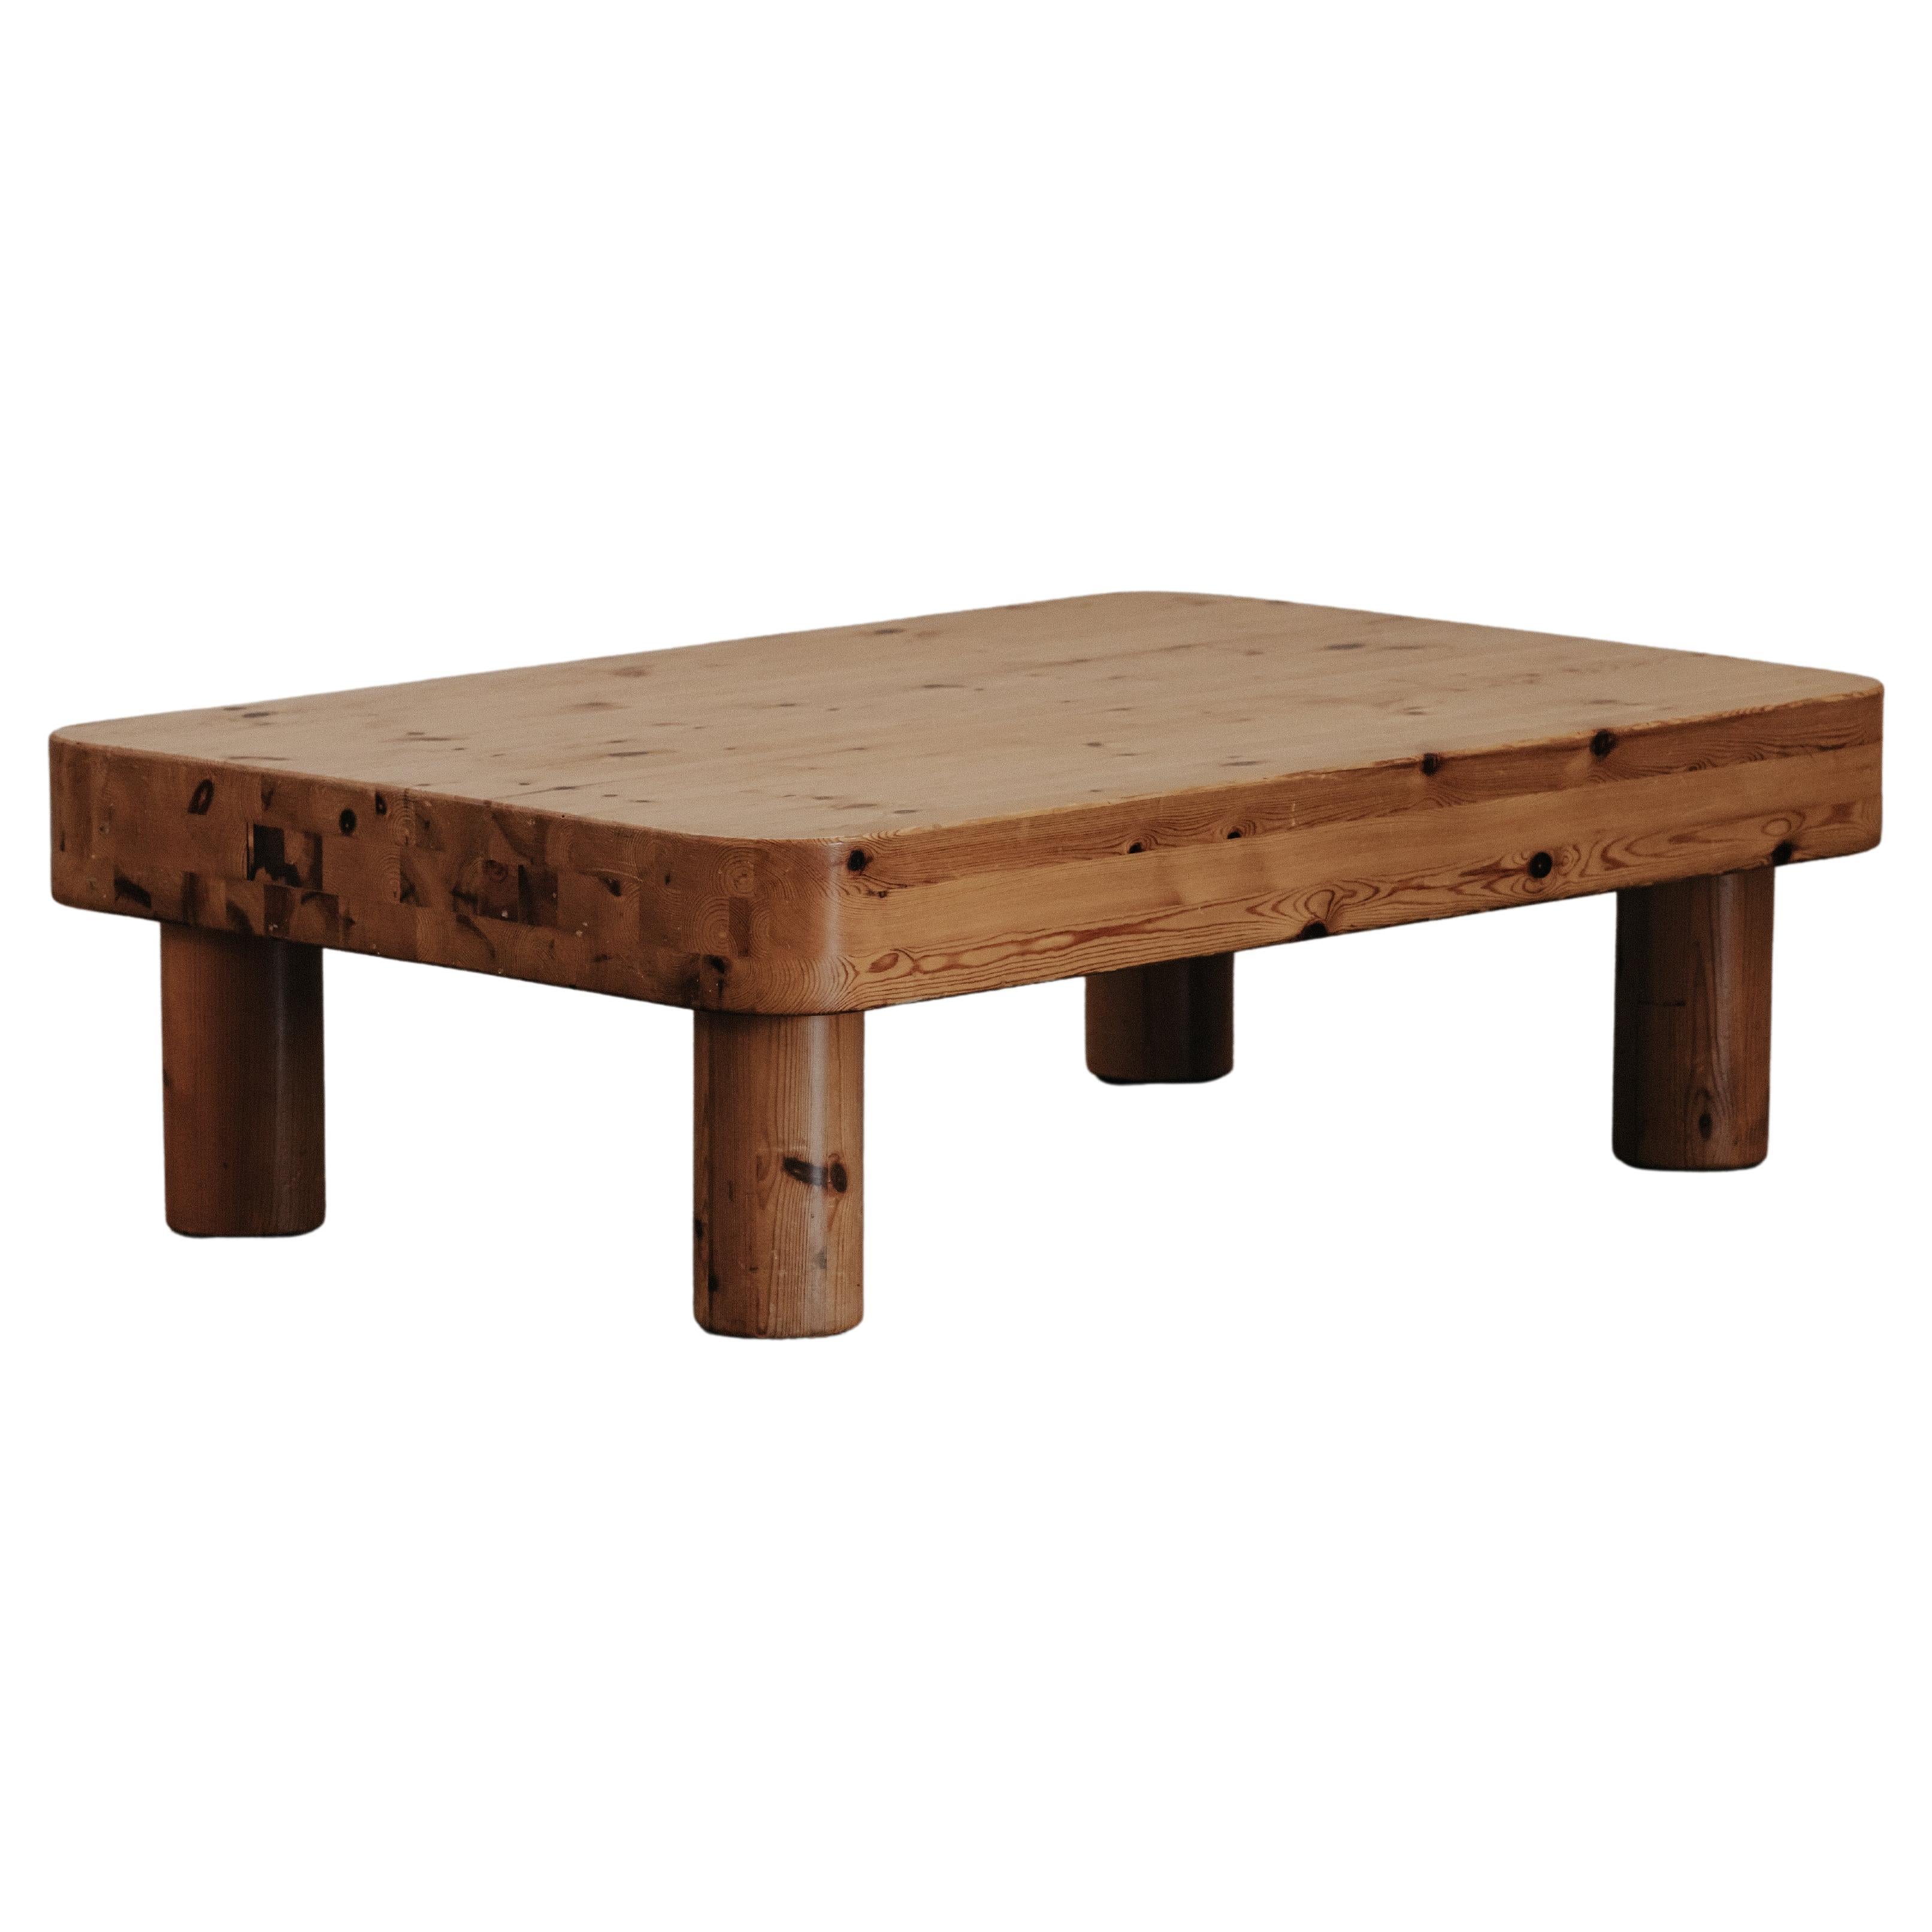 Vintage Rectangle Pine Coffee Table From France, Circa 1960